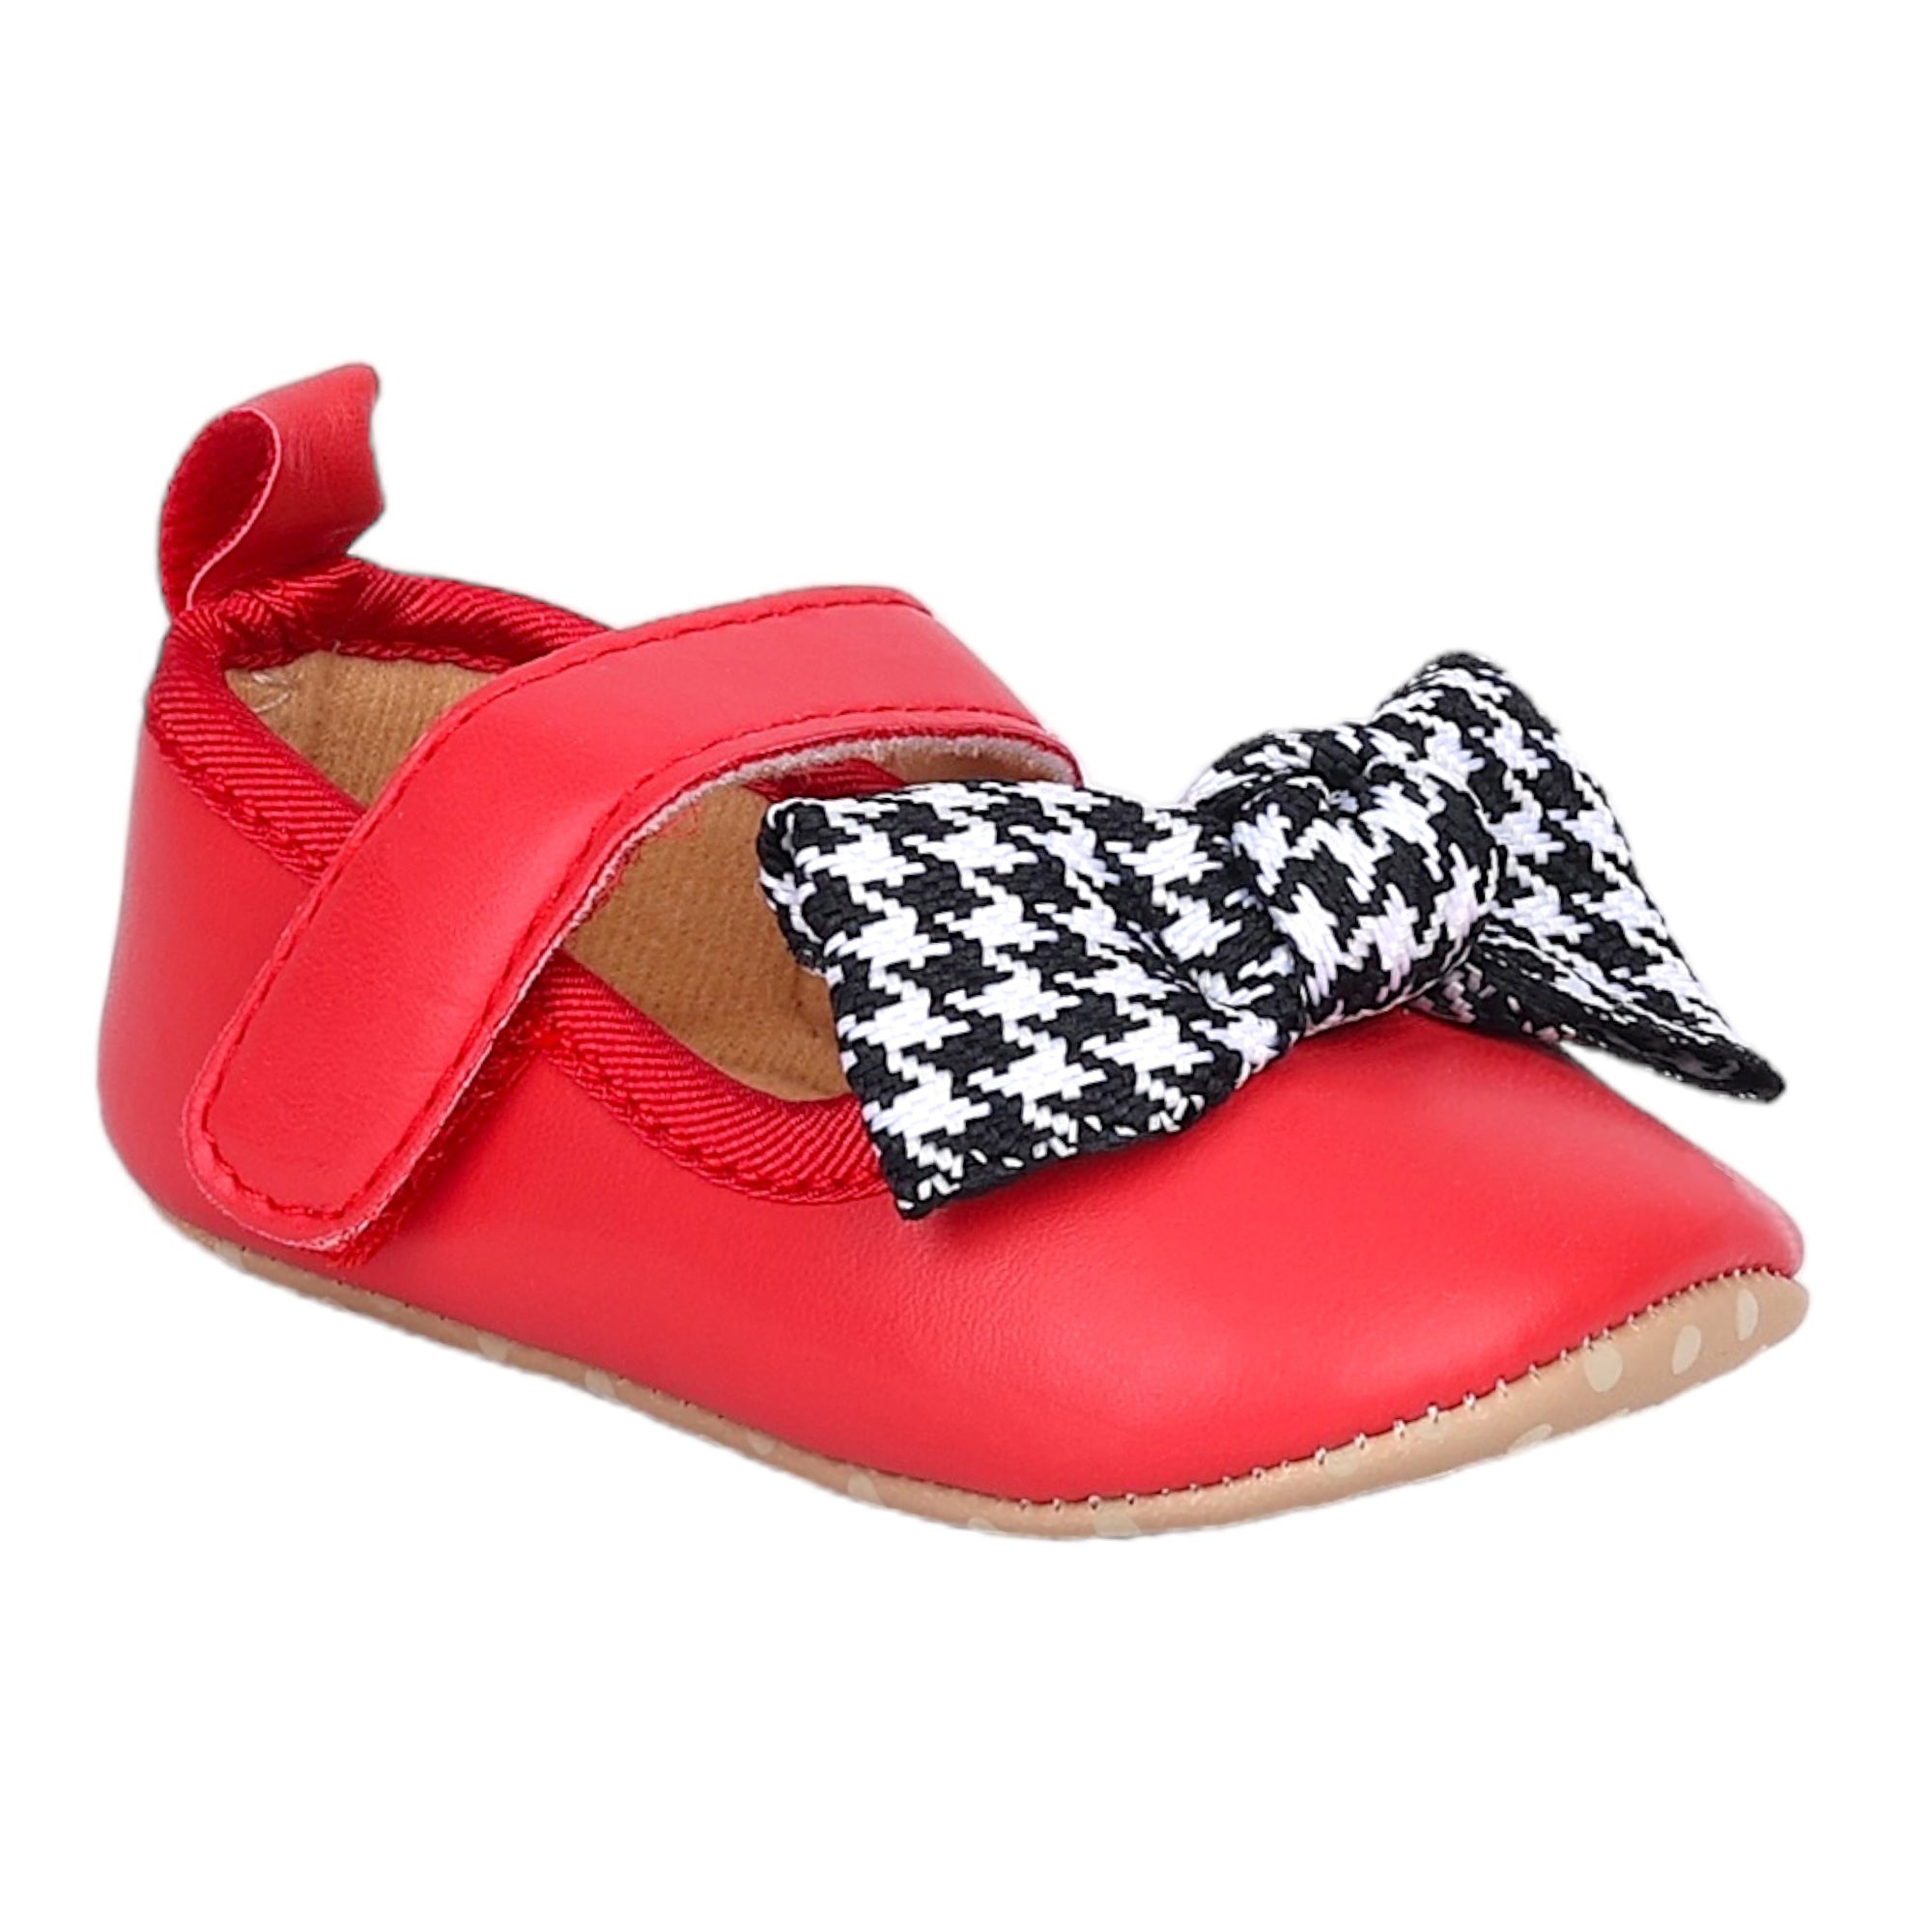 Baby Moo Houndstooth Bow Knot Velcro Strap Anti-Skid Ballerina Booties - Red